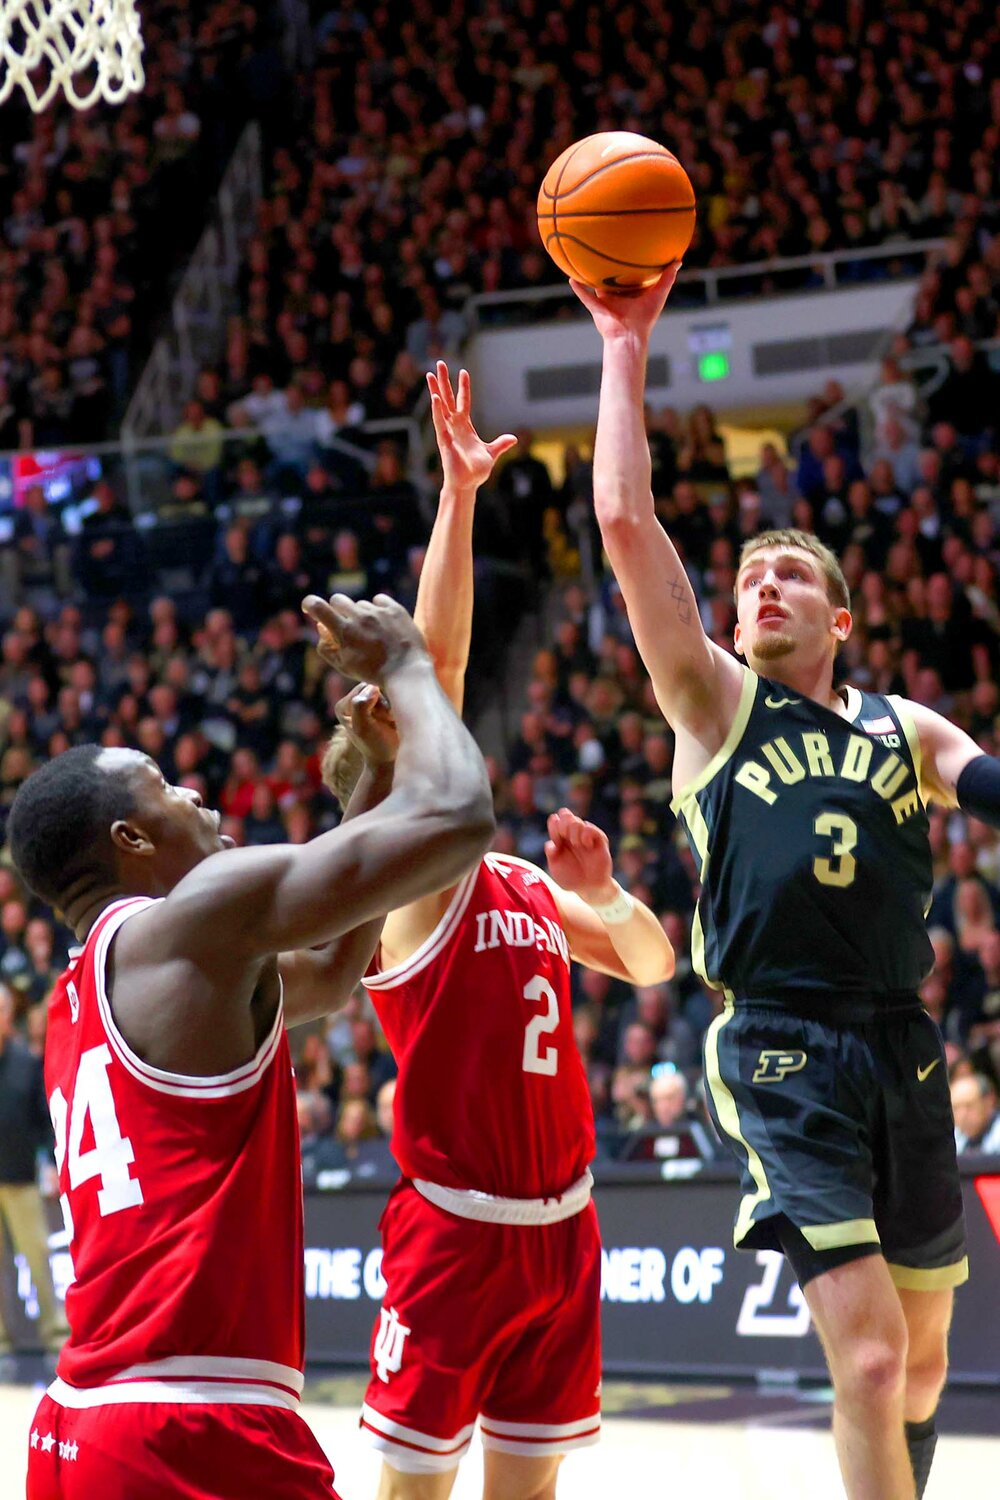 Braden Smith of Purdue - shooting a lay-up over Gabe Cupps (2) and Payton Sparks of Indiana